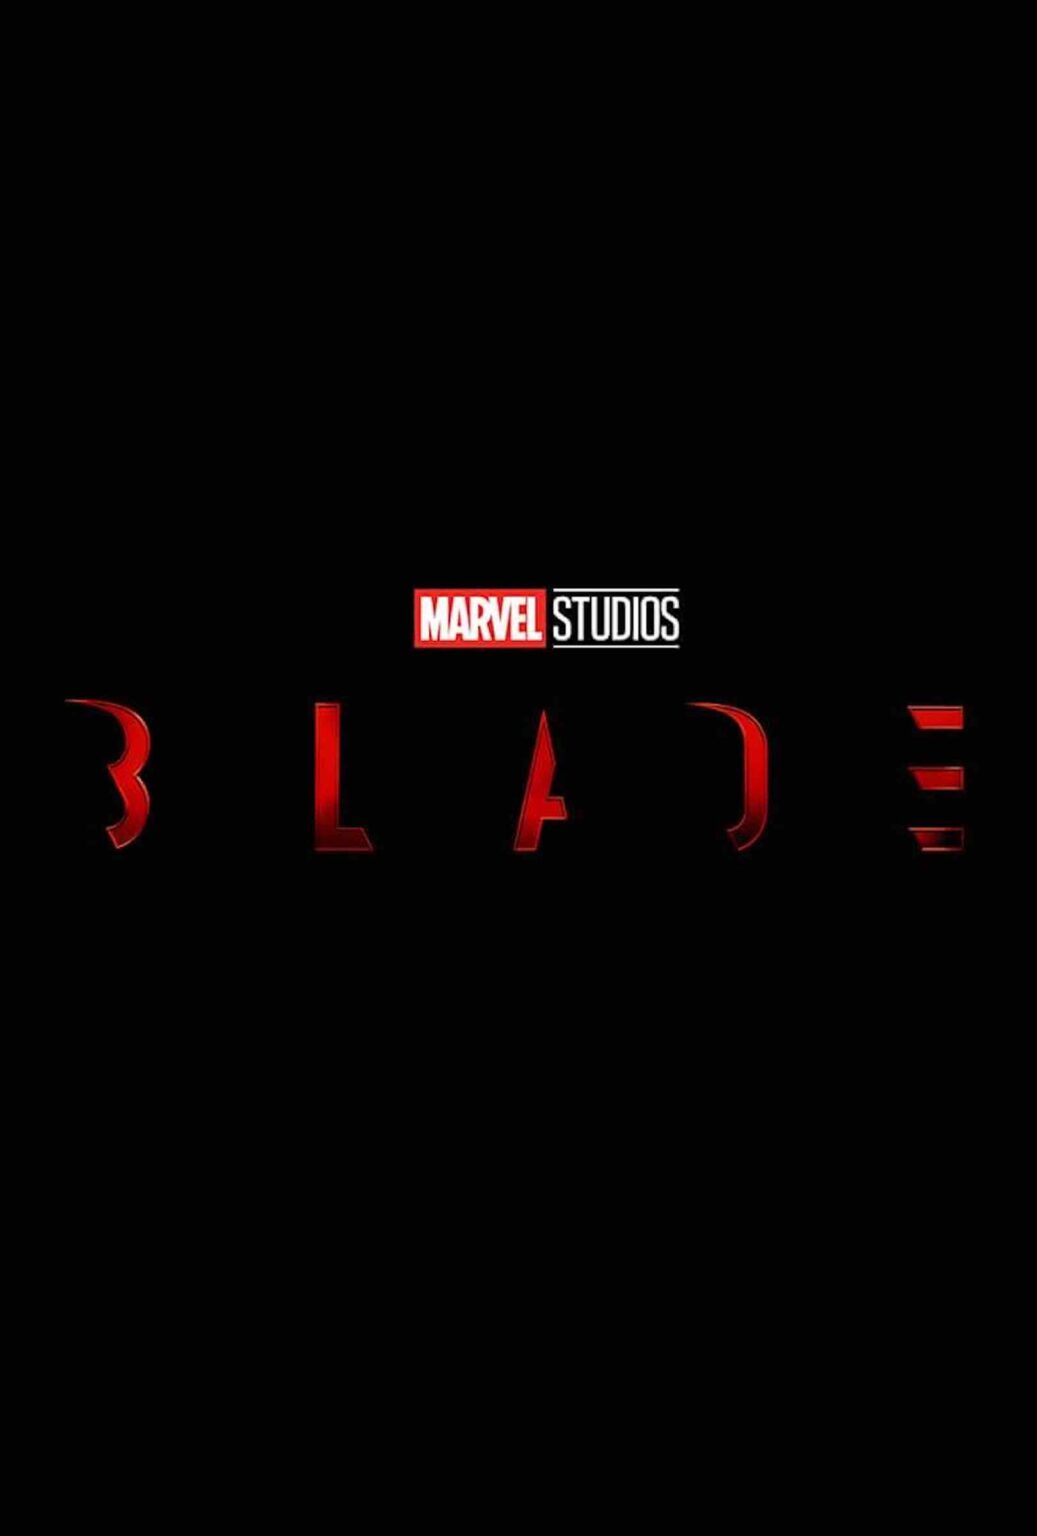 With all of these updates, why's Marvel silent about this film? Grab your stakes and dive into what we know about the silence surrounding the 'Blade' movie. 